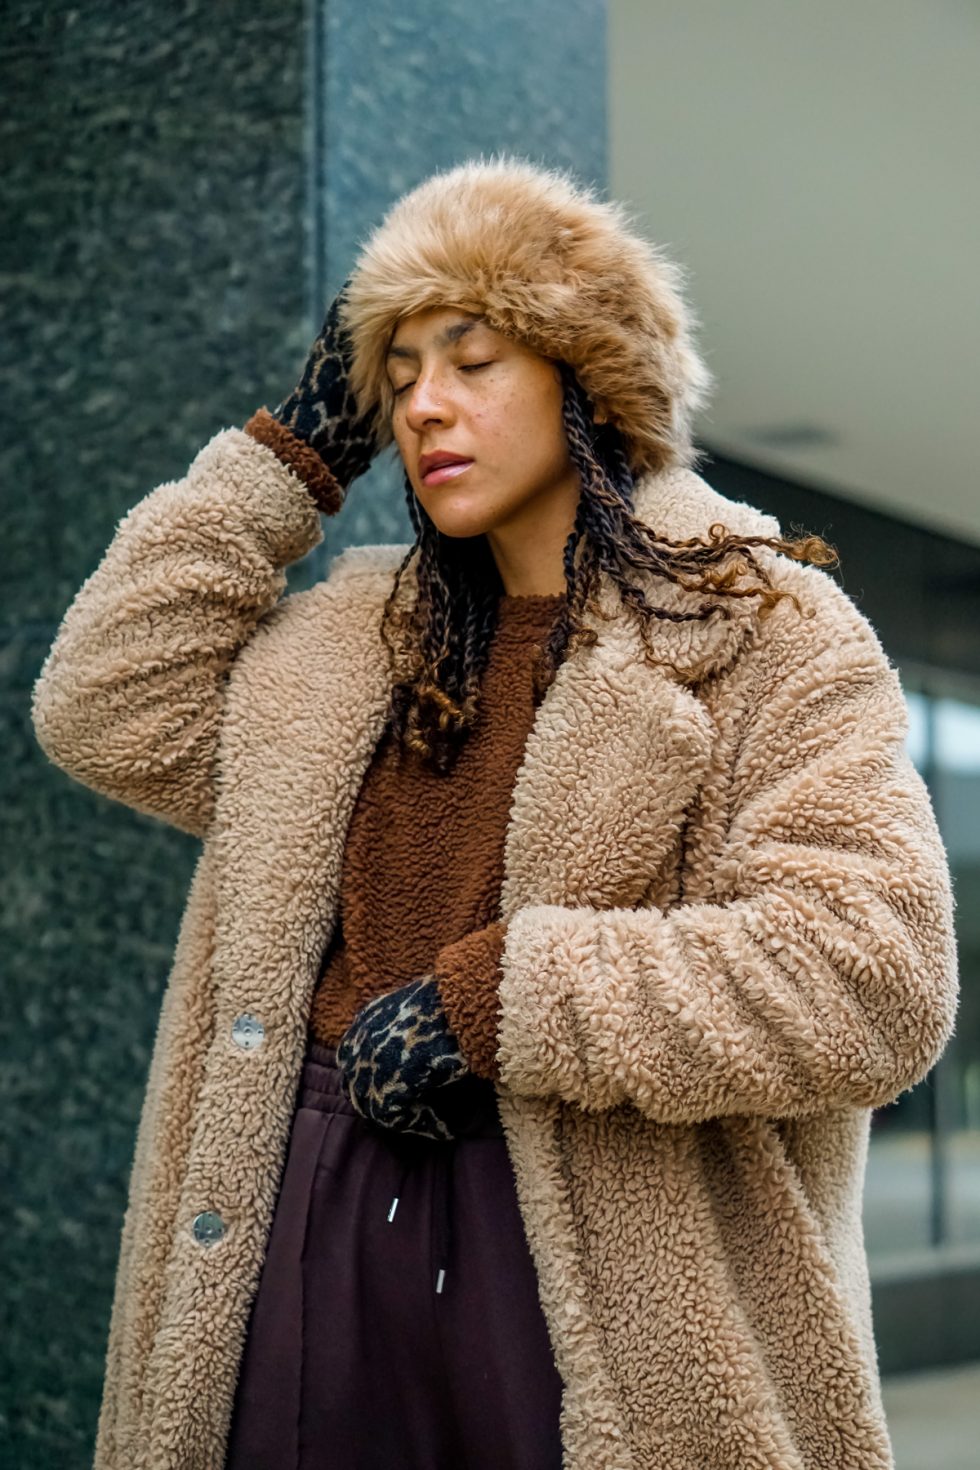 Sharing Some Essential Stylish Winter Accessories for Women